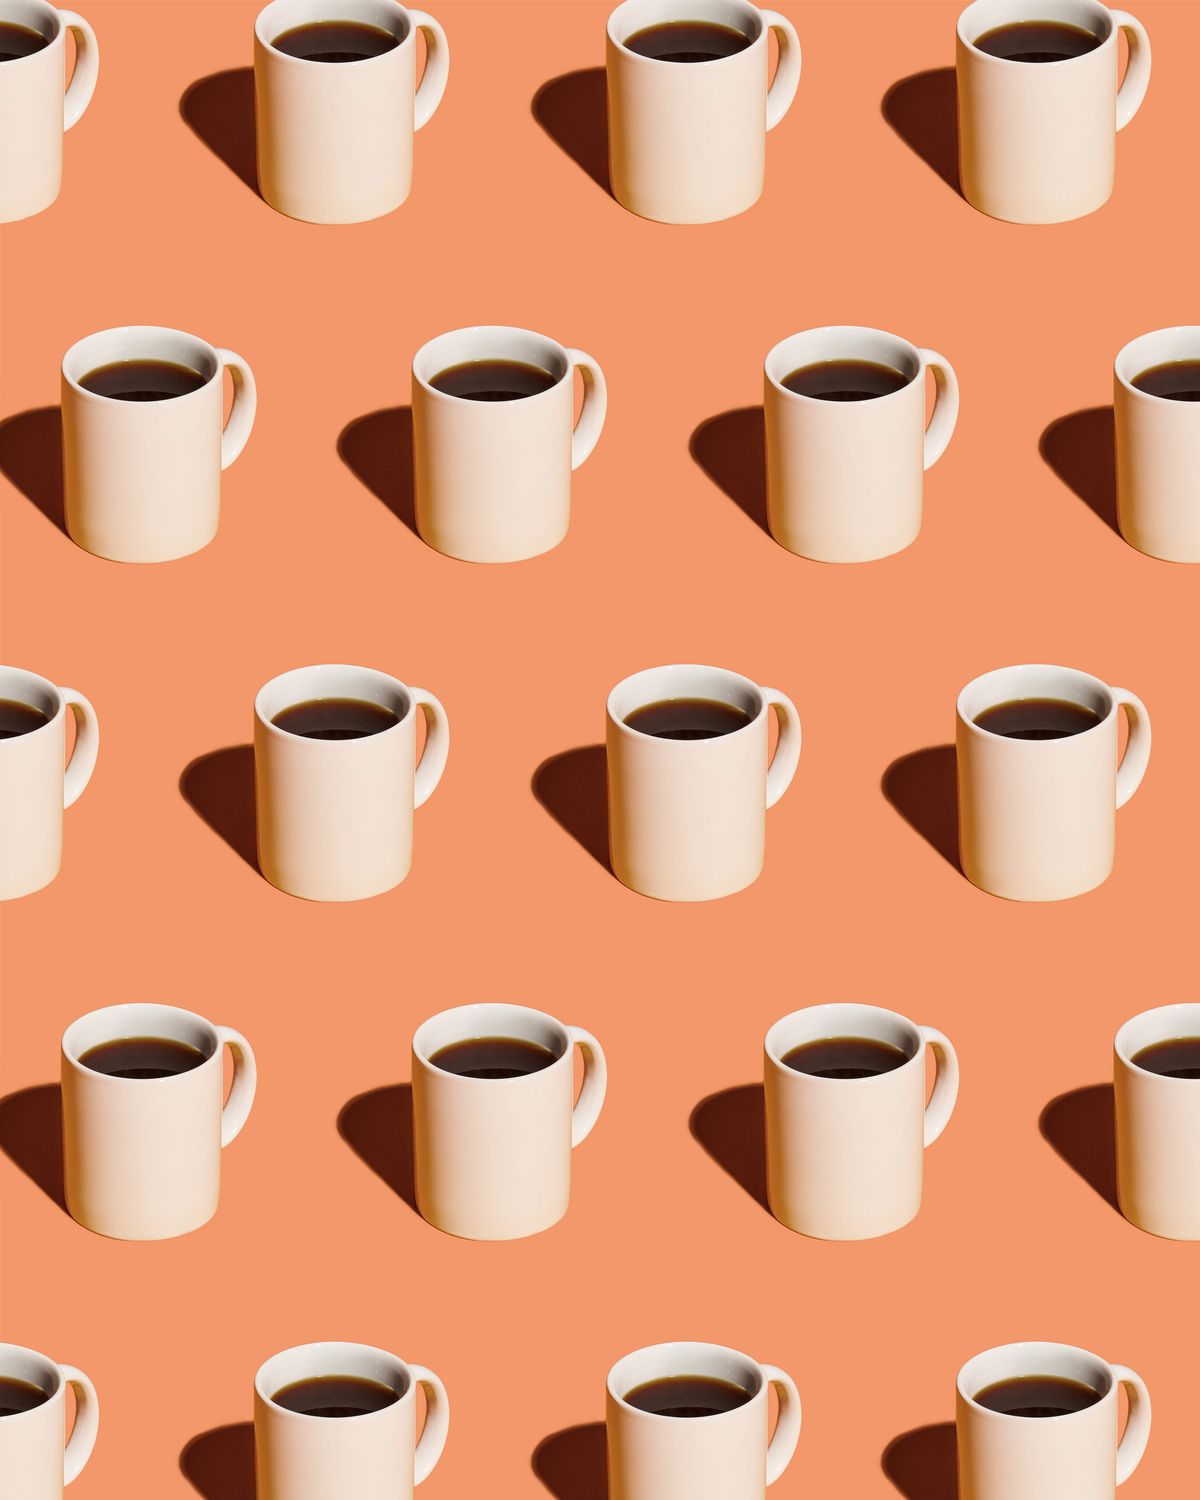 Meet A Cartoonist Who Drinks 25 Cups Of Coffee Per Day